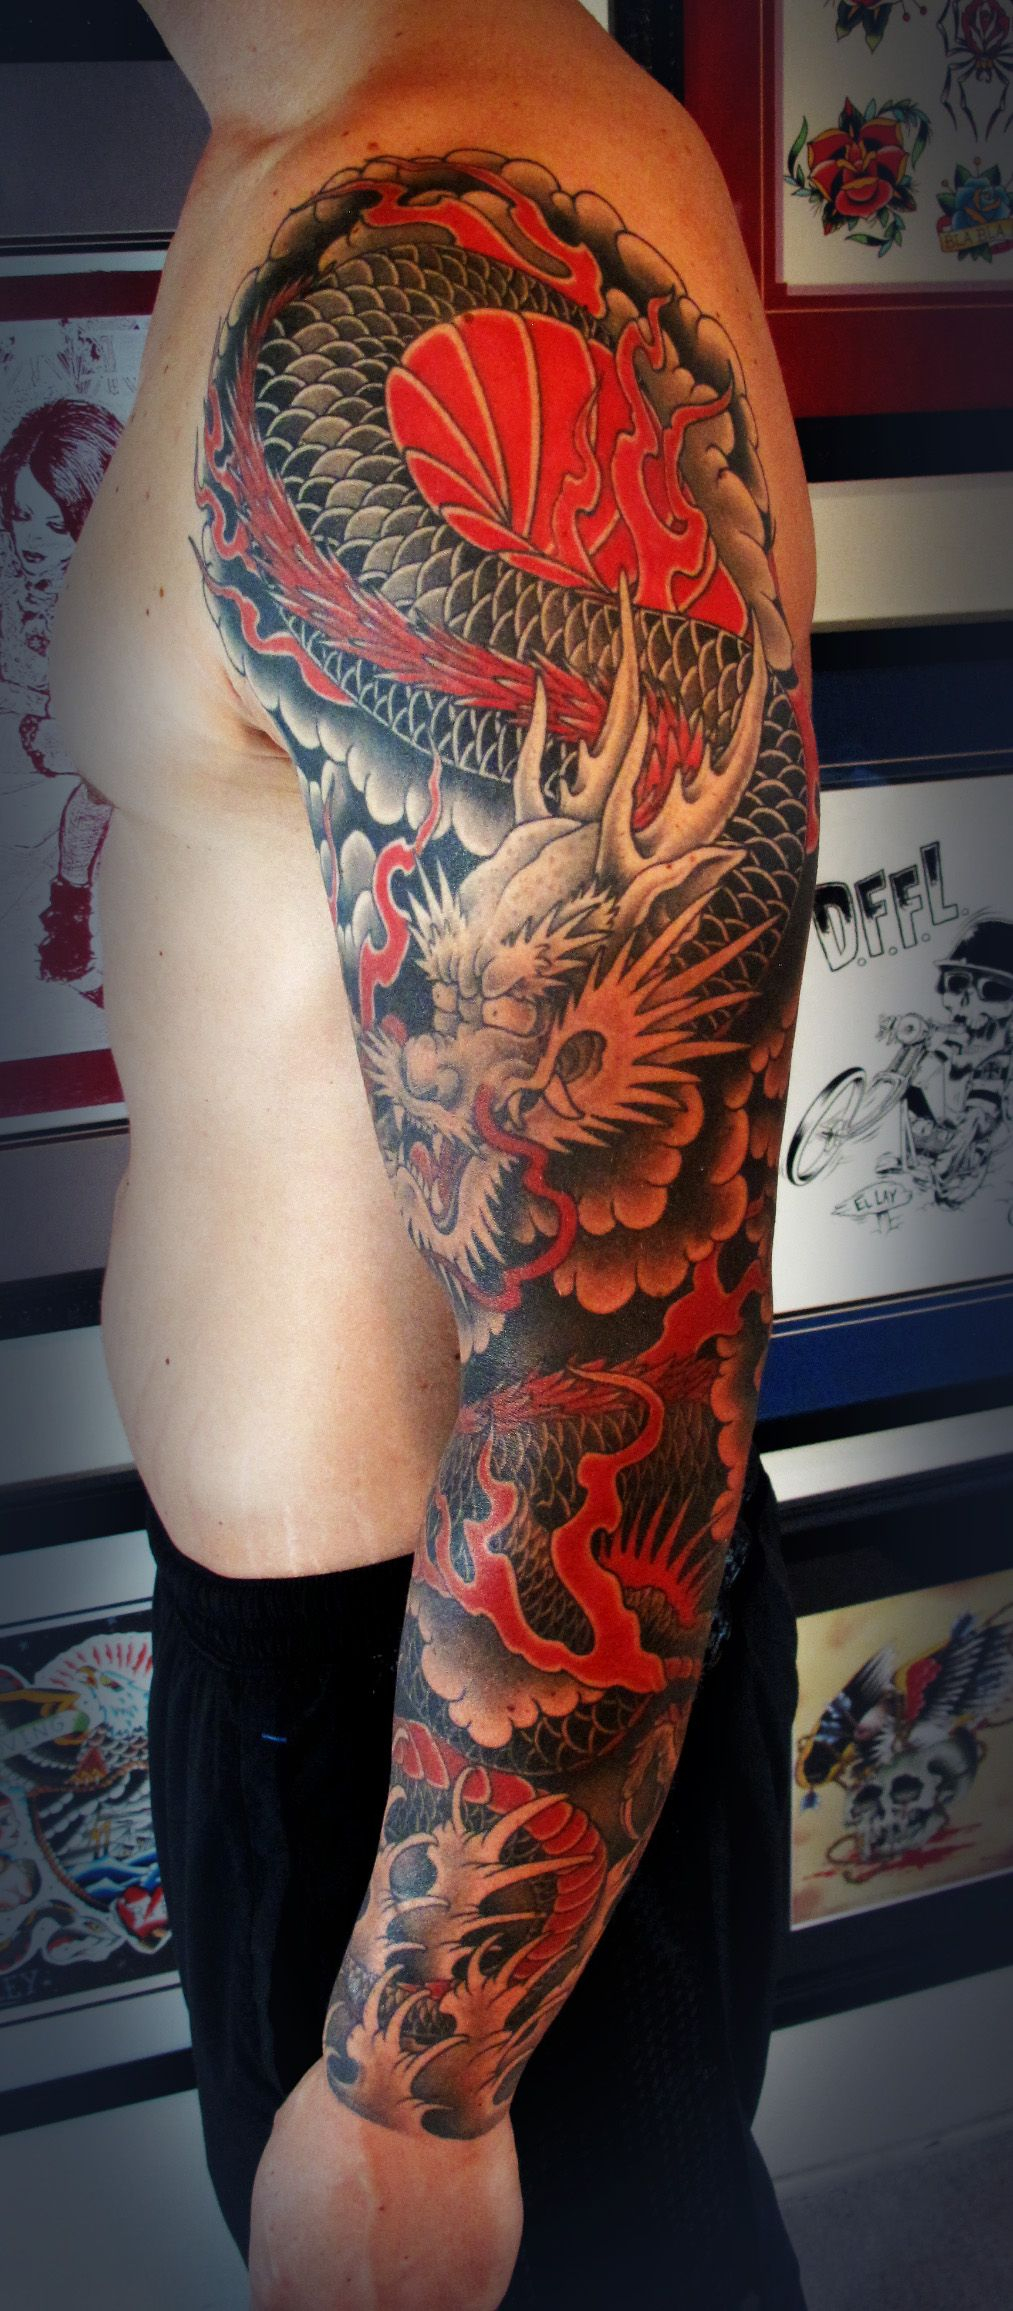 Japanesedragontattoos Dragon Sleeve Saltwatertattoo Japanese with size 1013 X 2311